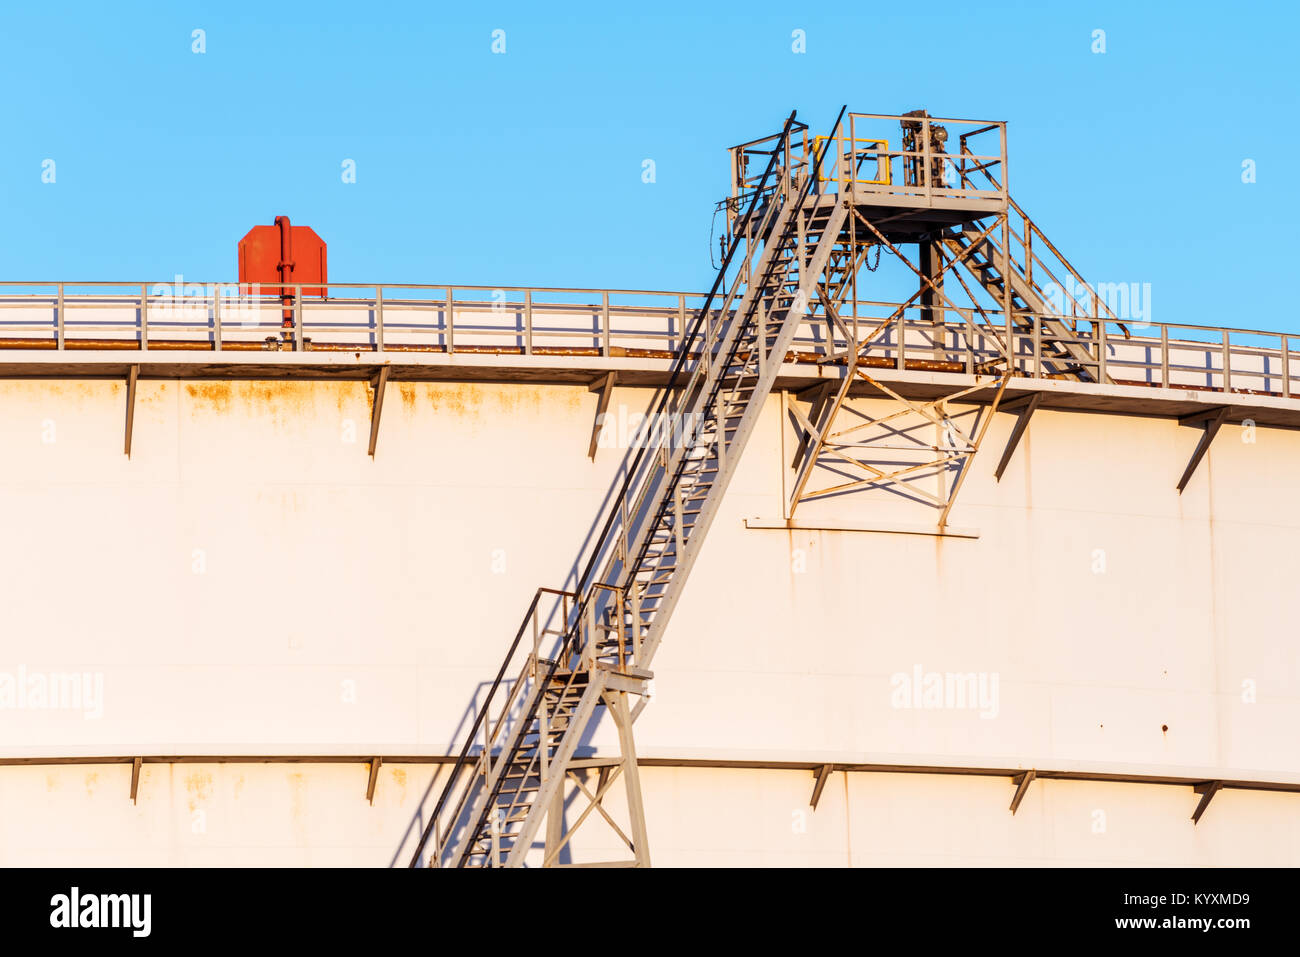 Detail of a staircase alongside a large oil storage tank on a sunny late afternoon in the harbour of Rotterdam. Stock Photo